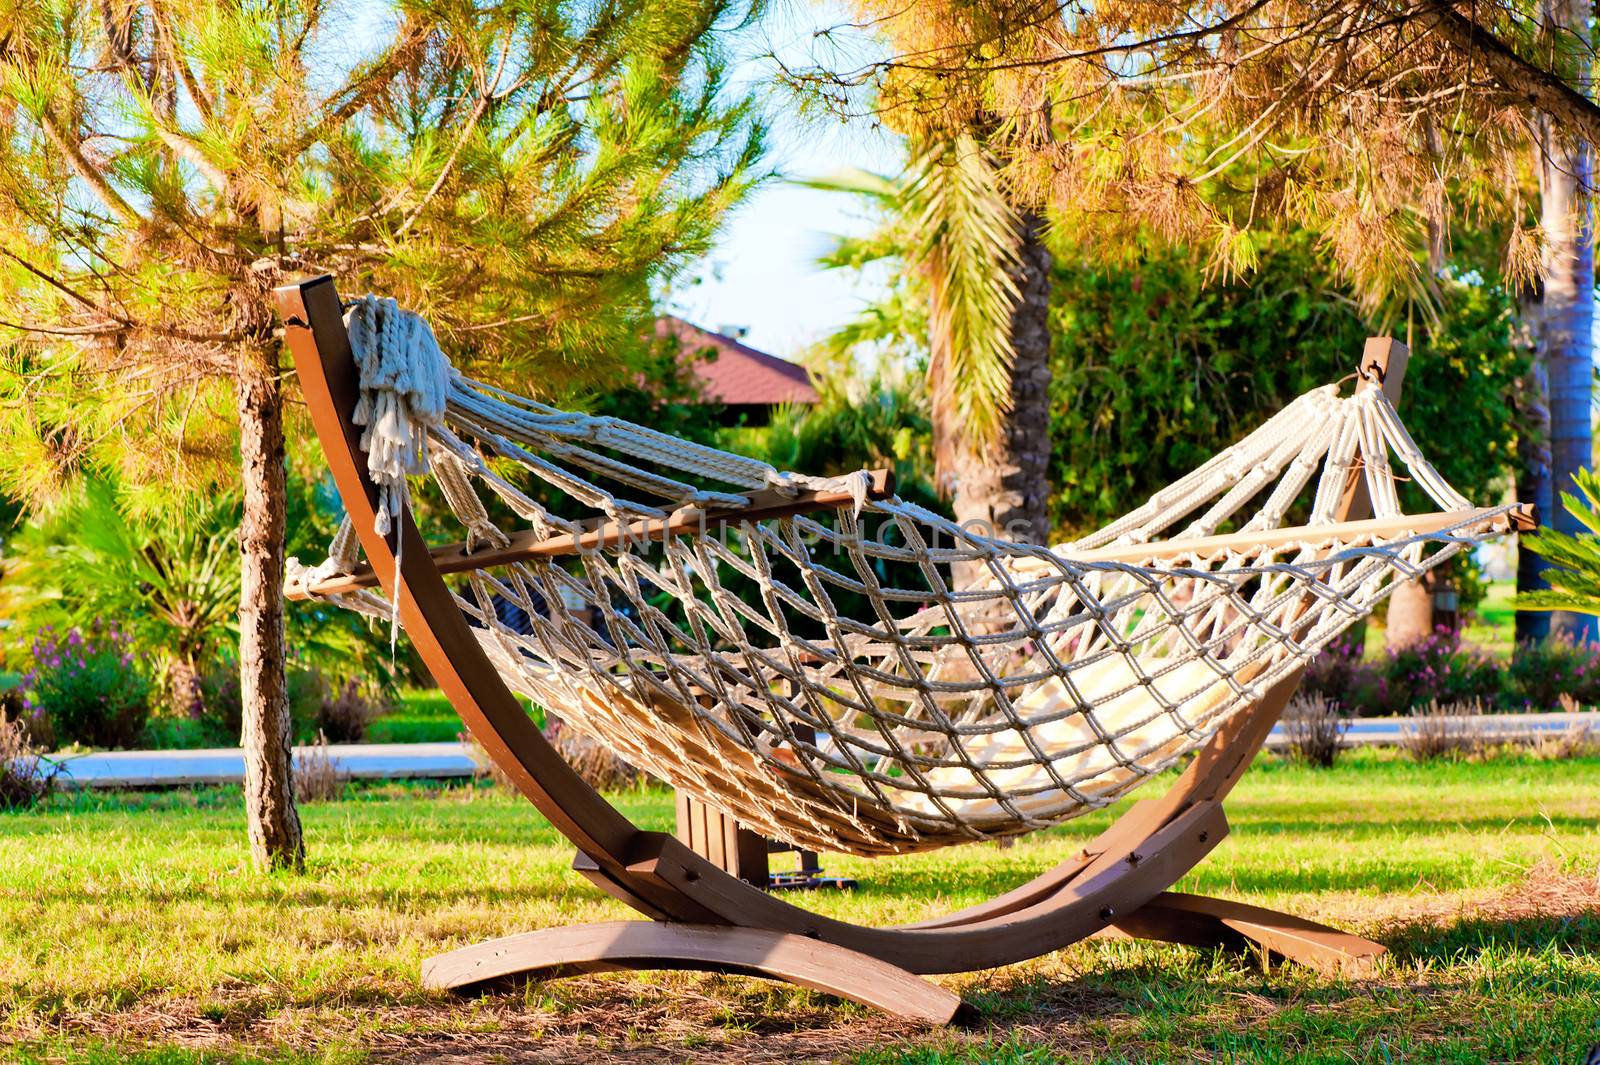 Hammock to relax in the tropical garden